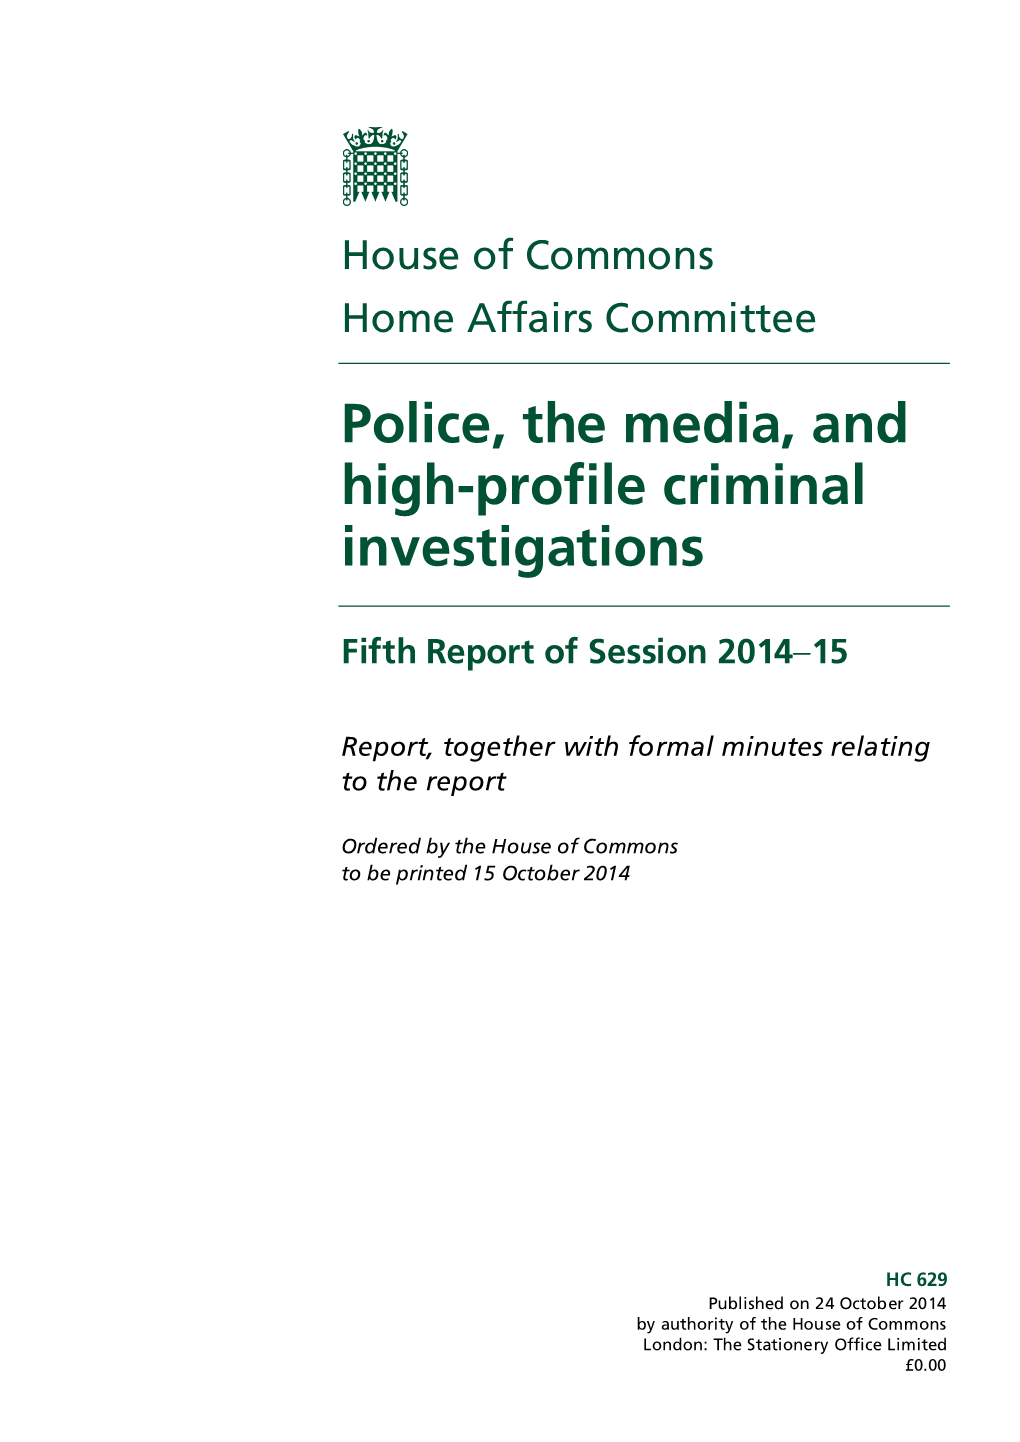 Police, the Media, and High-Profile Criminal Investigations